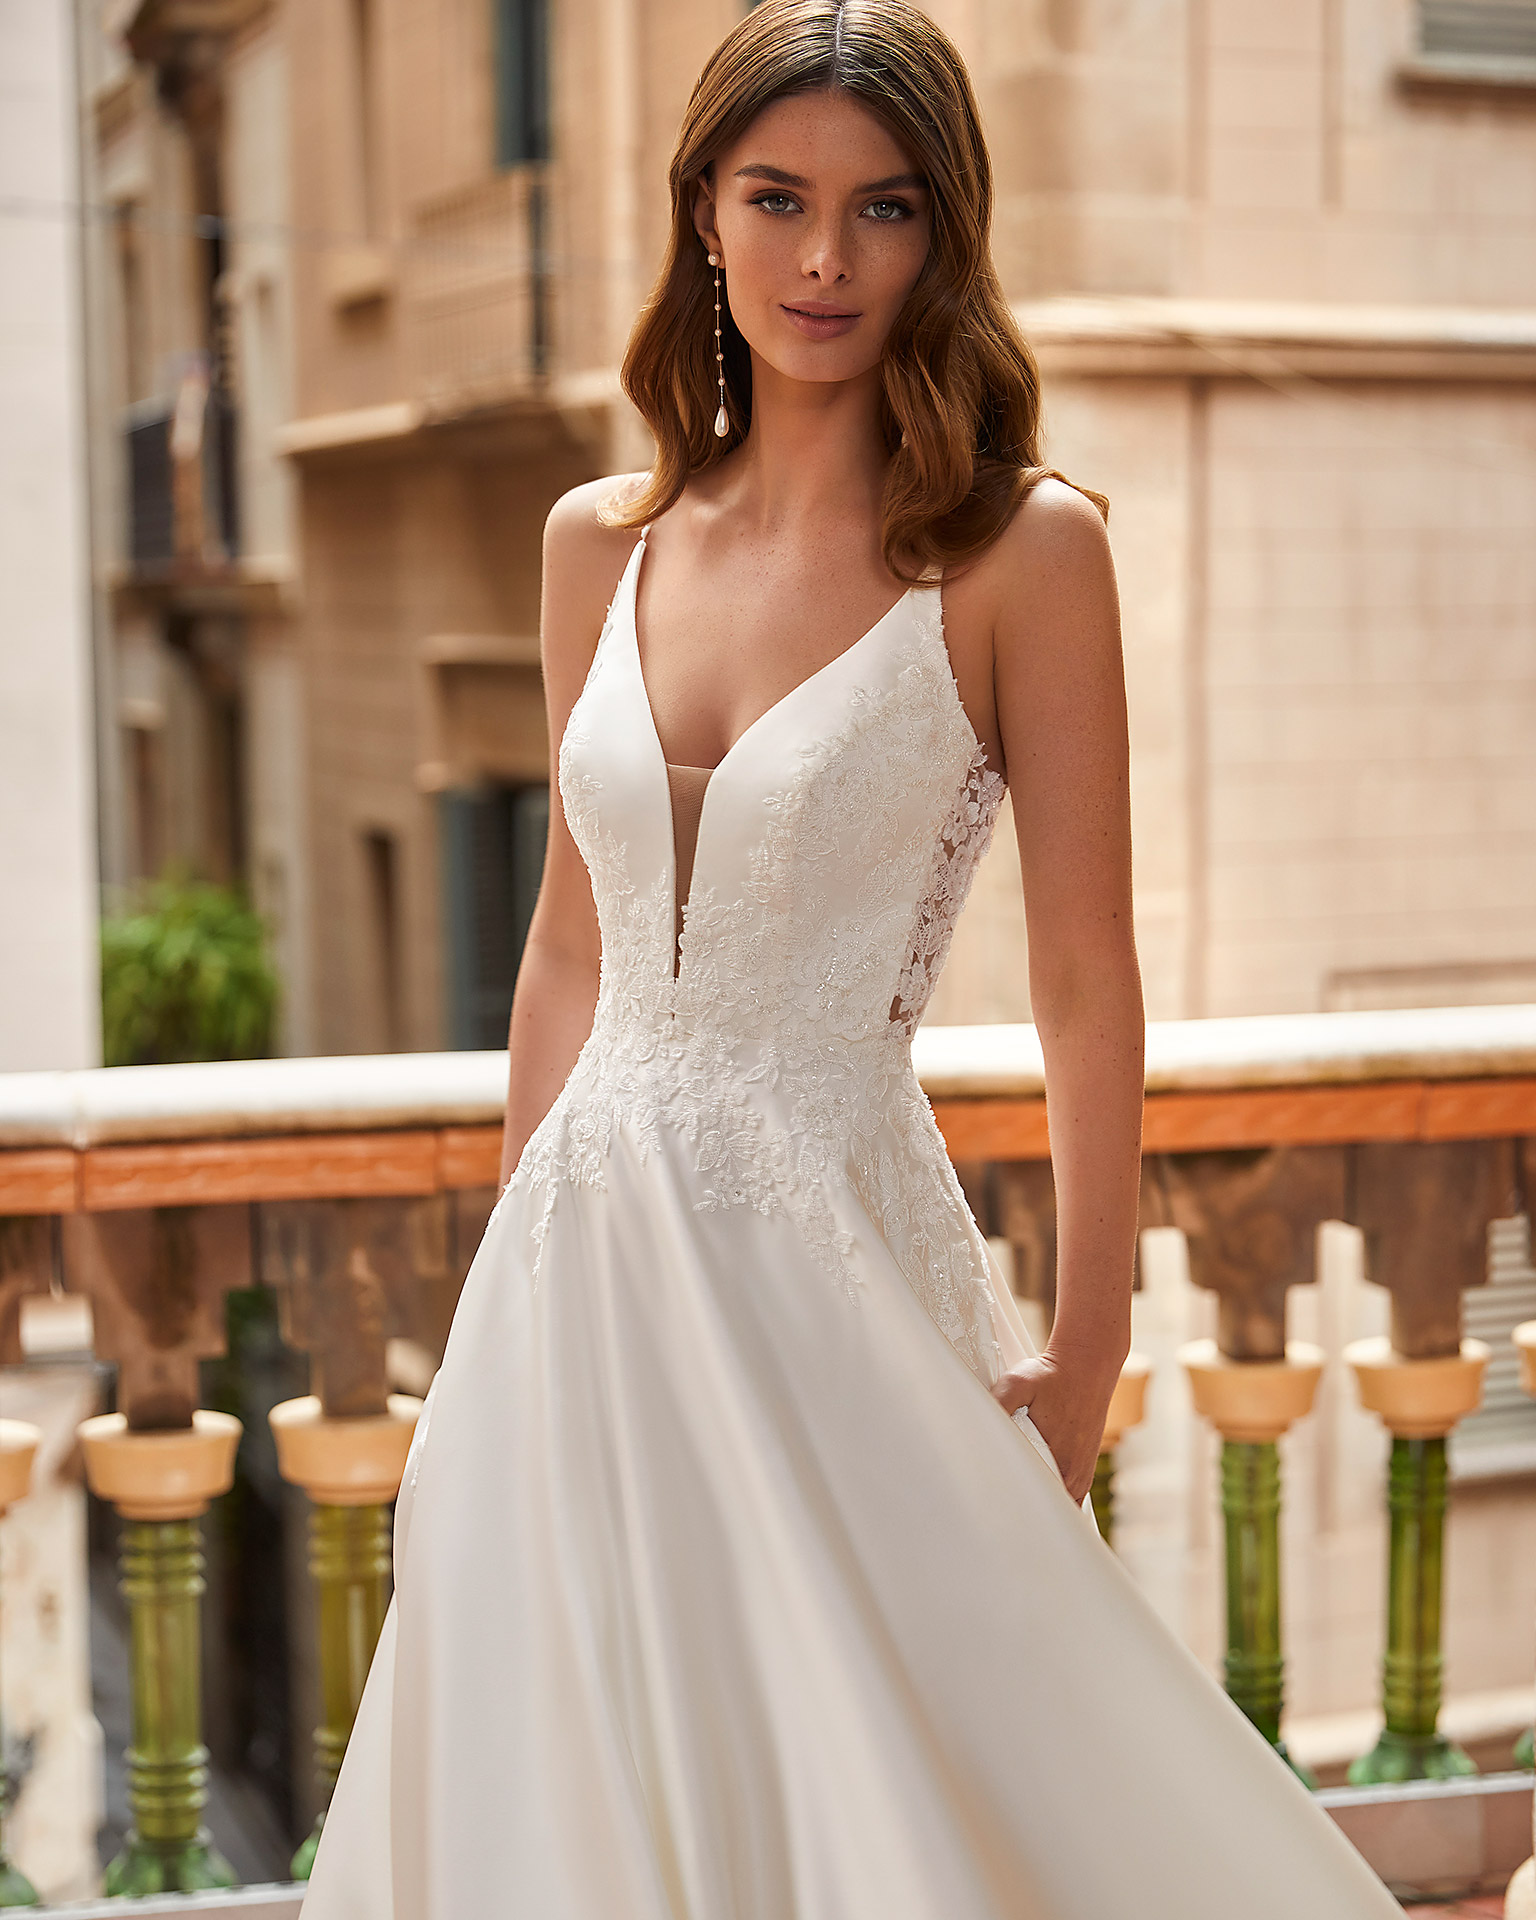 Classic-style wedding dress, made of satin, with lace appliqués on the bodice; with a deep-plunge neckline, a plunging lace back, and straps. Unique Luna Novias look made of satin combined with lace. LUNA_NOVIAS.